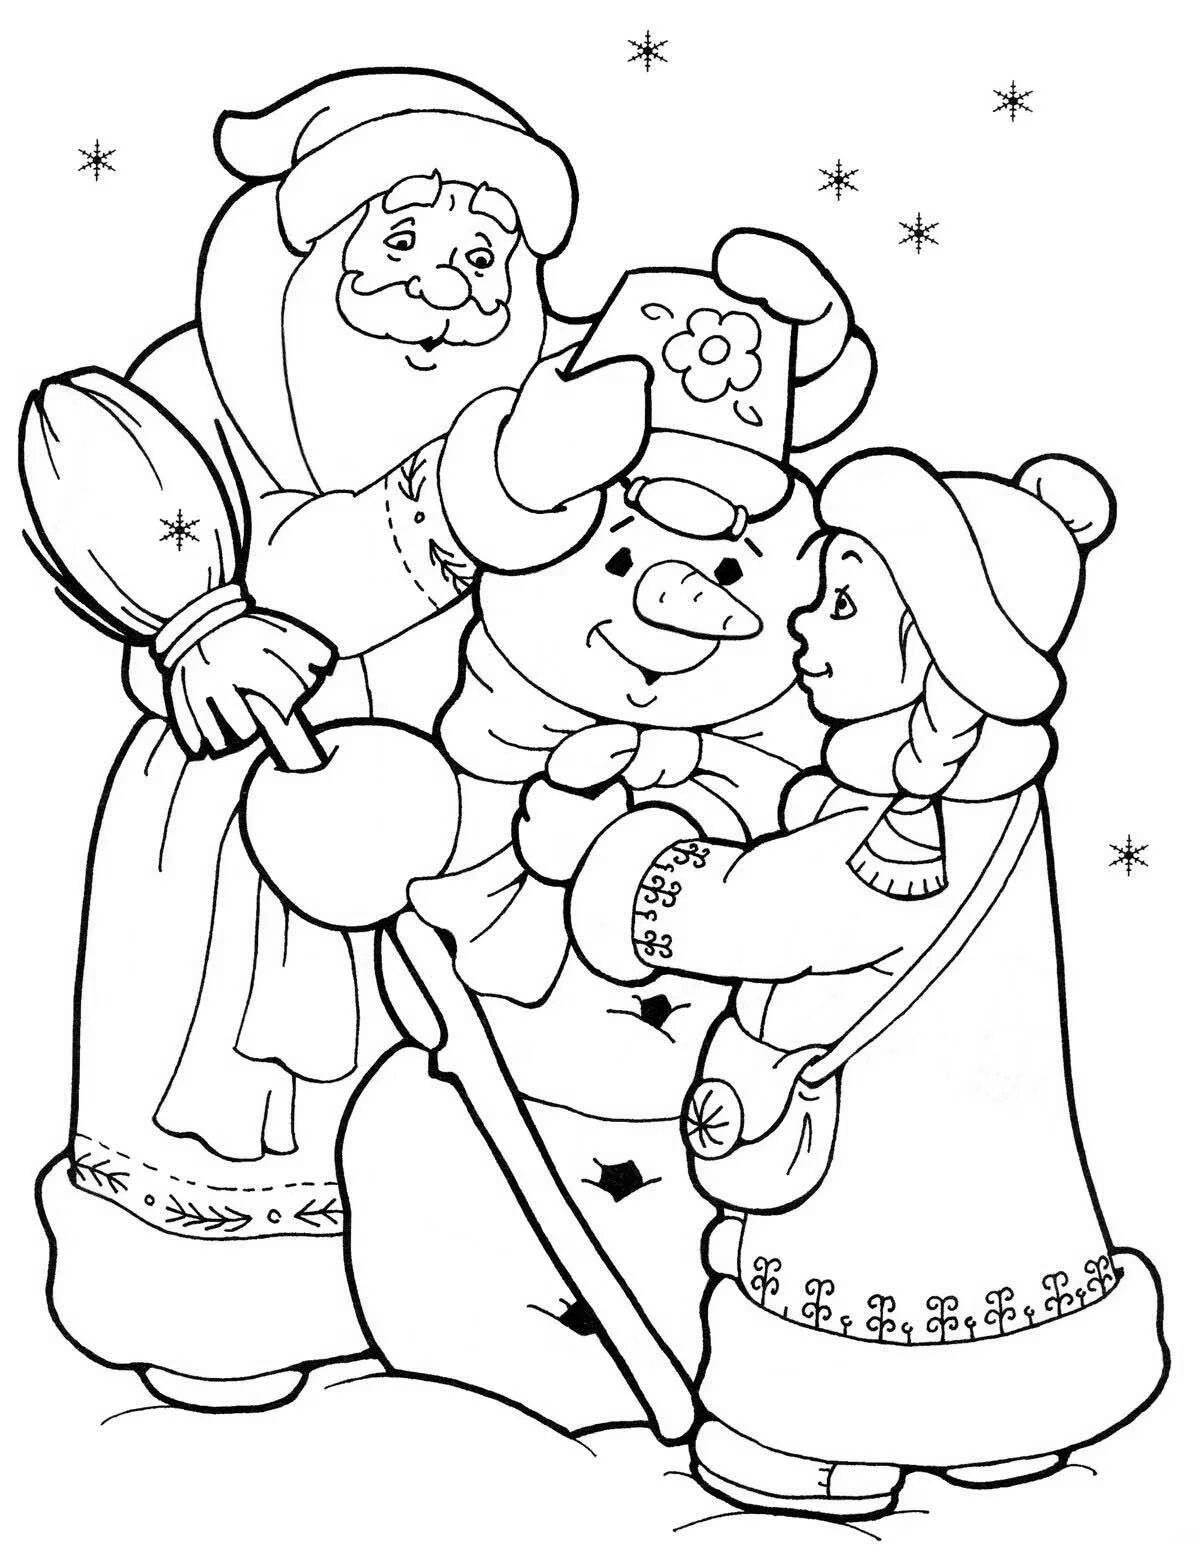 Coloring page whimsical snow maiden